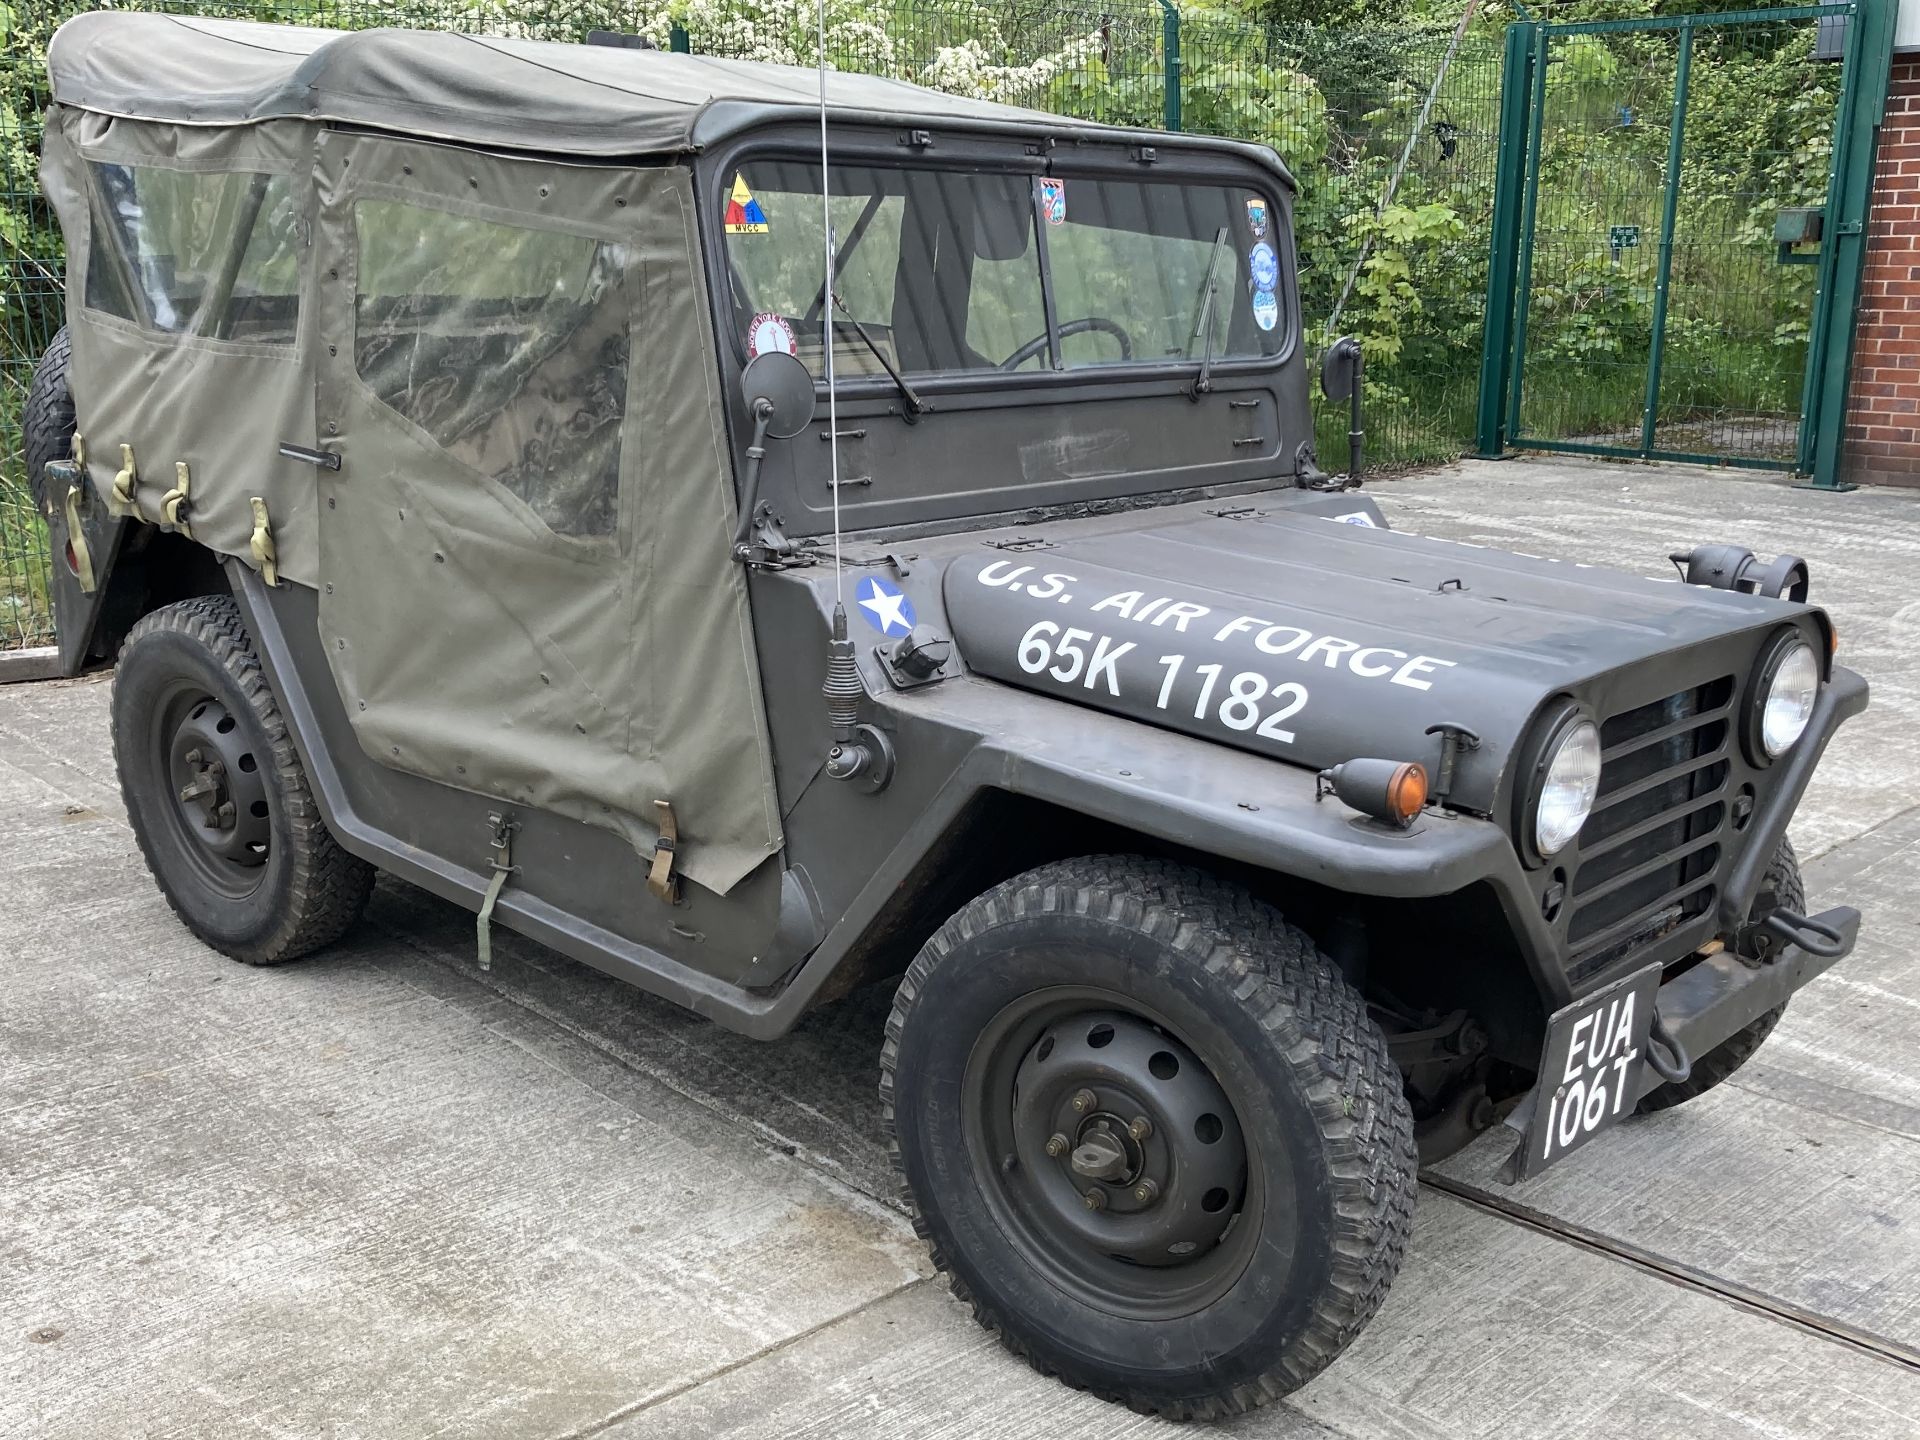 A FORD M151 (WILLYS) 1/4 TON 2.2 LIGHT 4X4 UTILITY JEEP - Petrol - Green - Ex USA Air Force. - Image 8 of 28